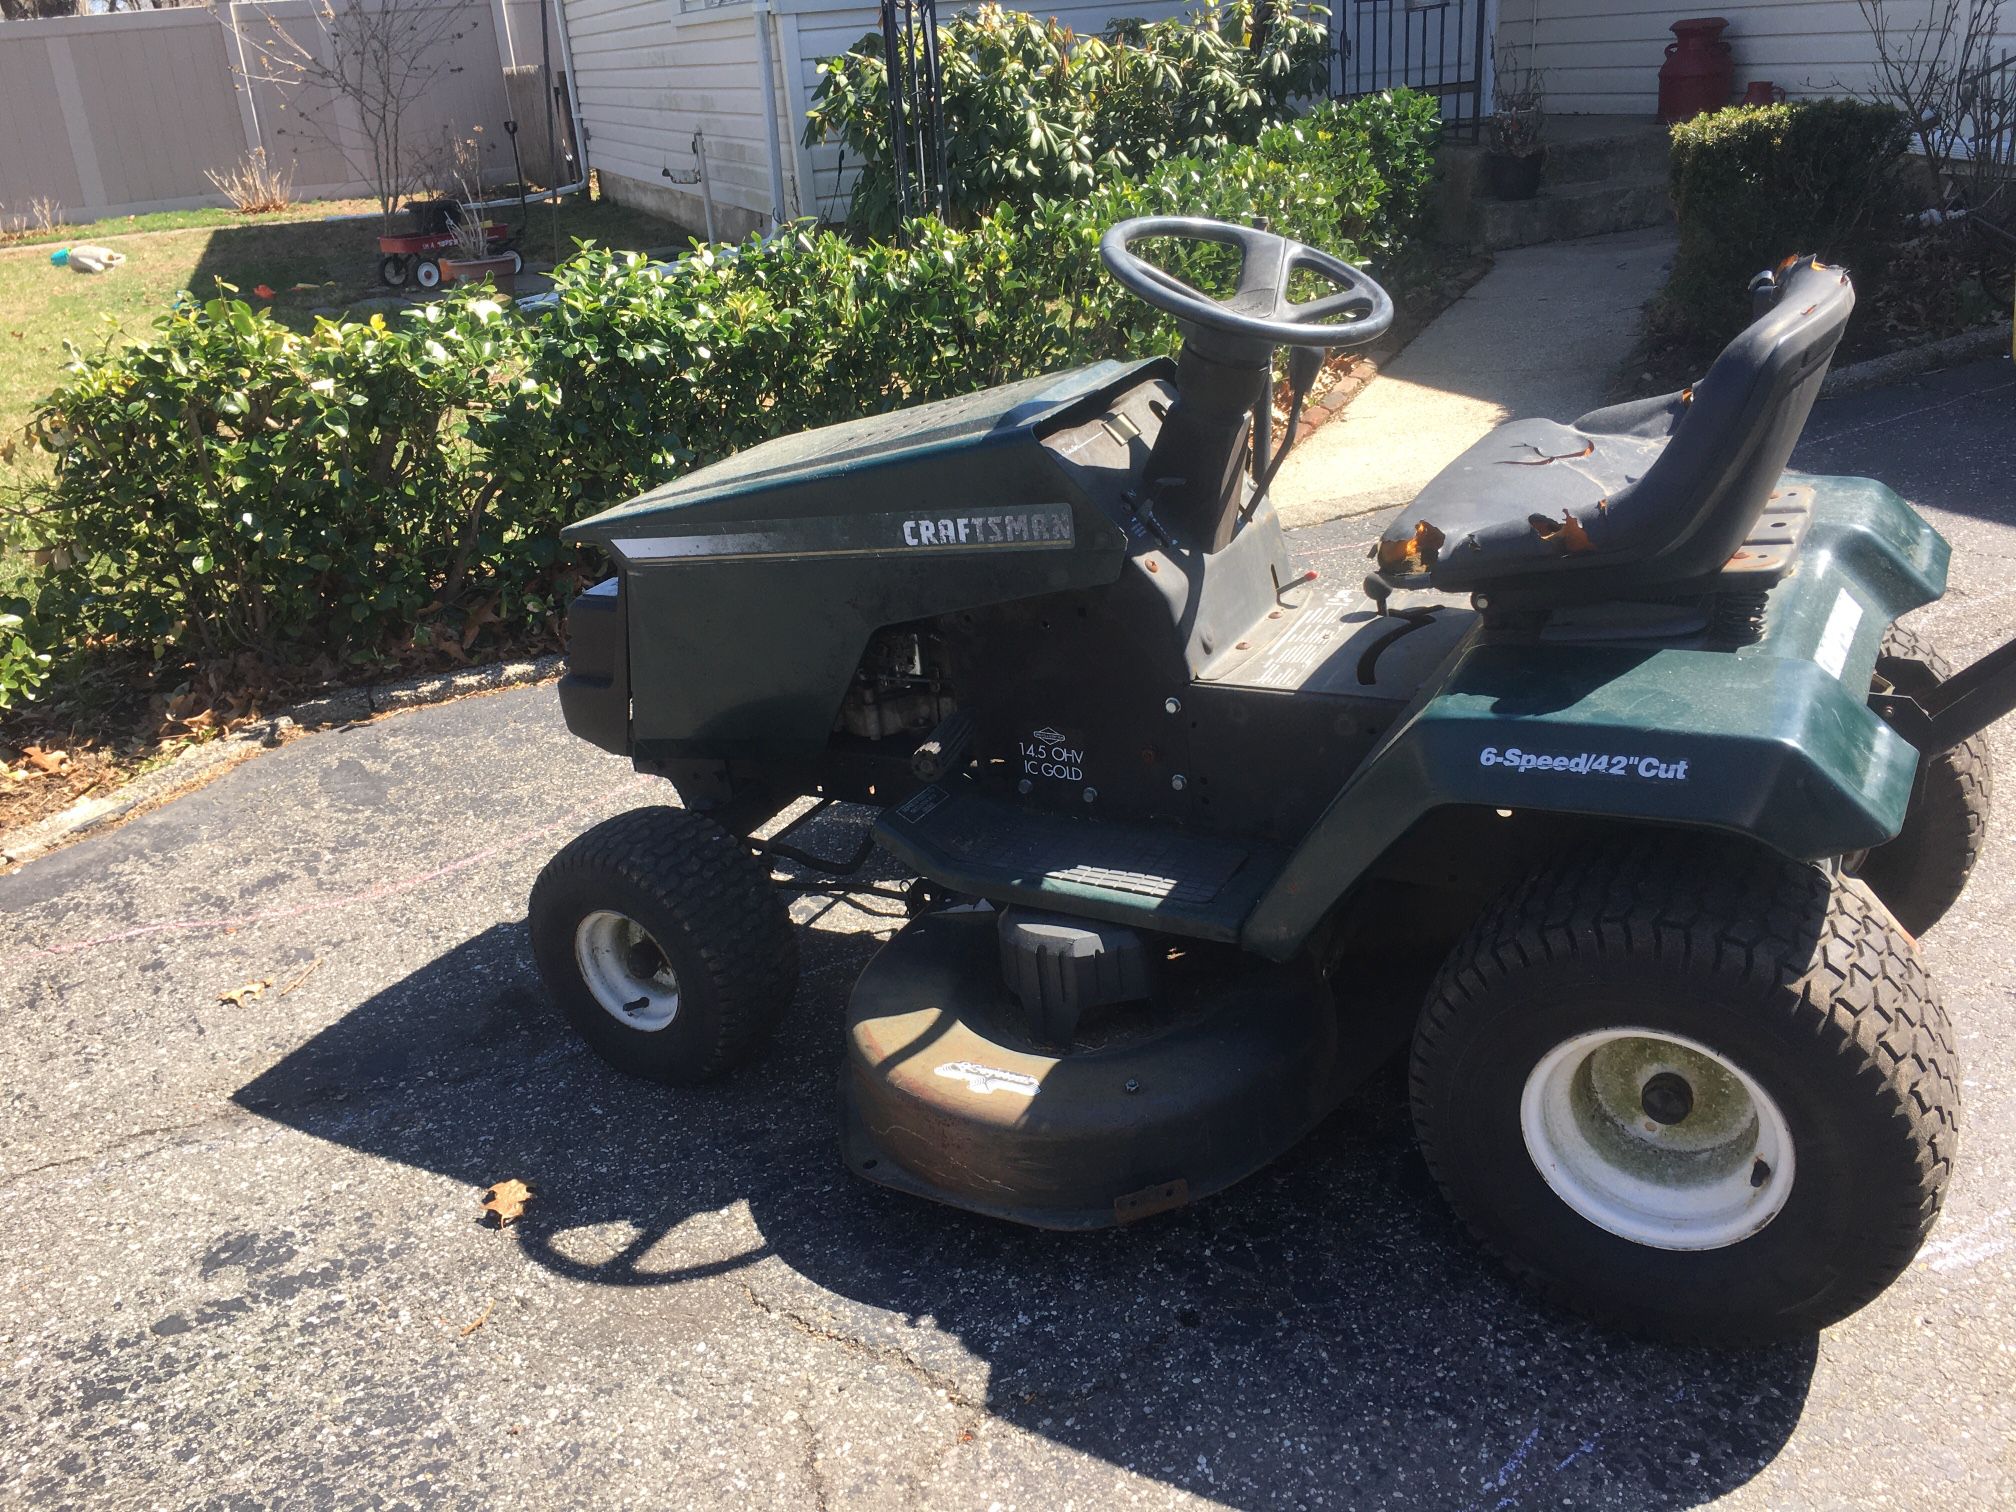 Craftsman Lawn Tractor - Works Great!